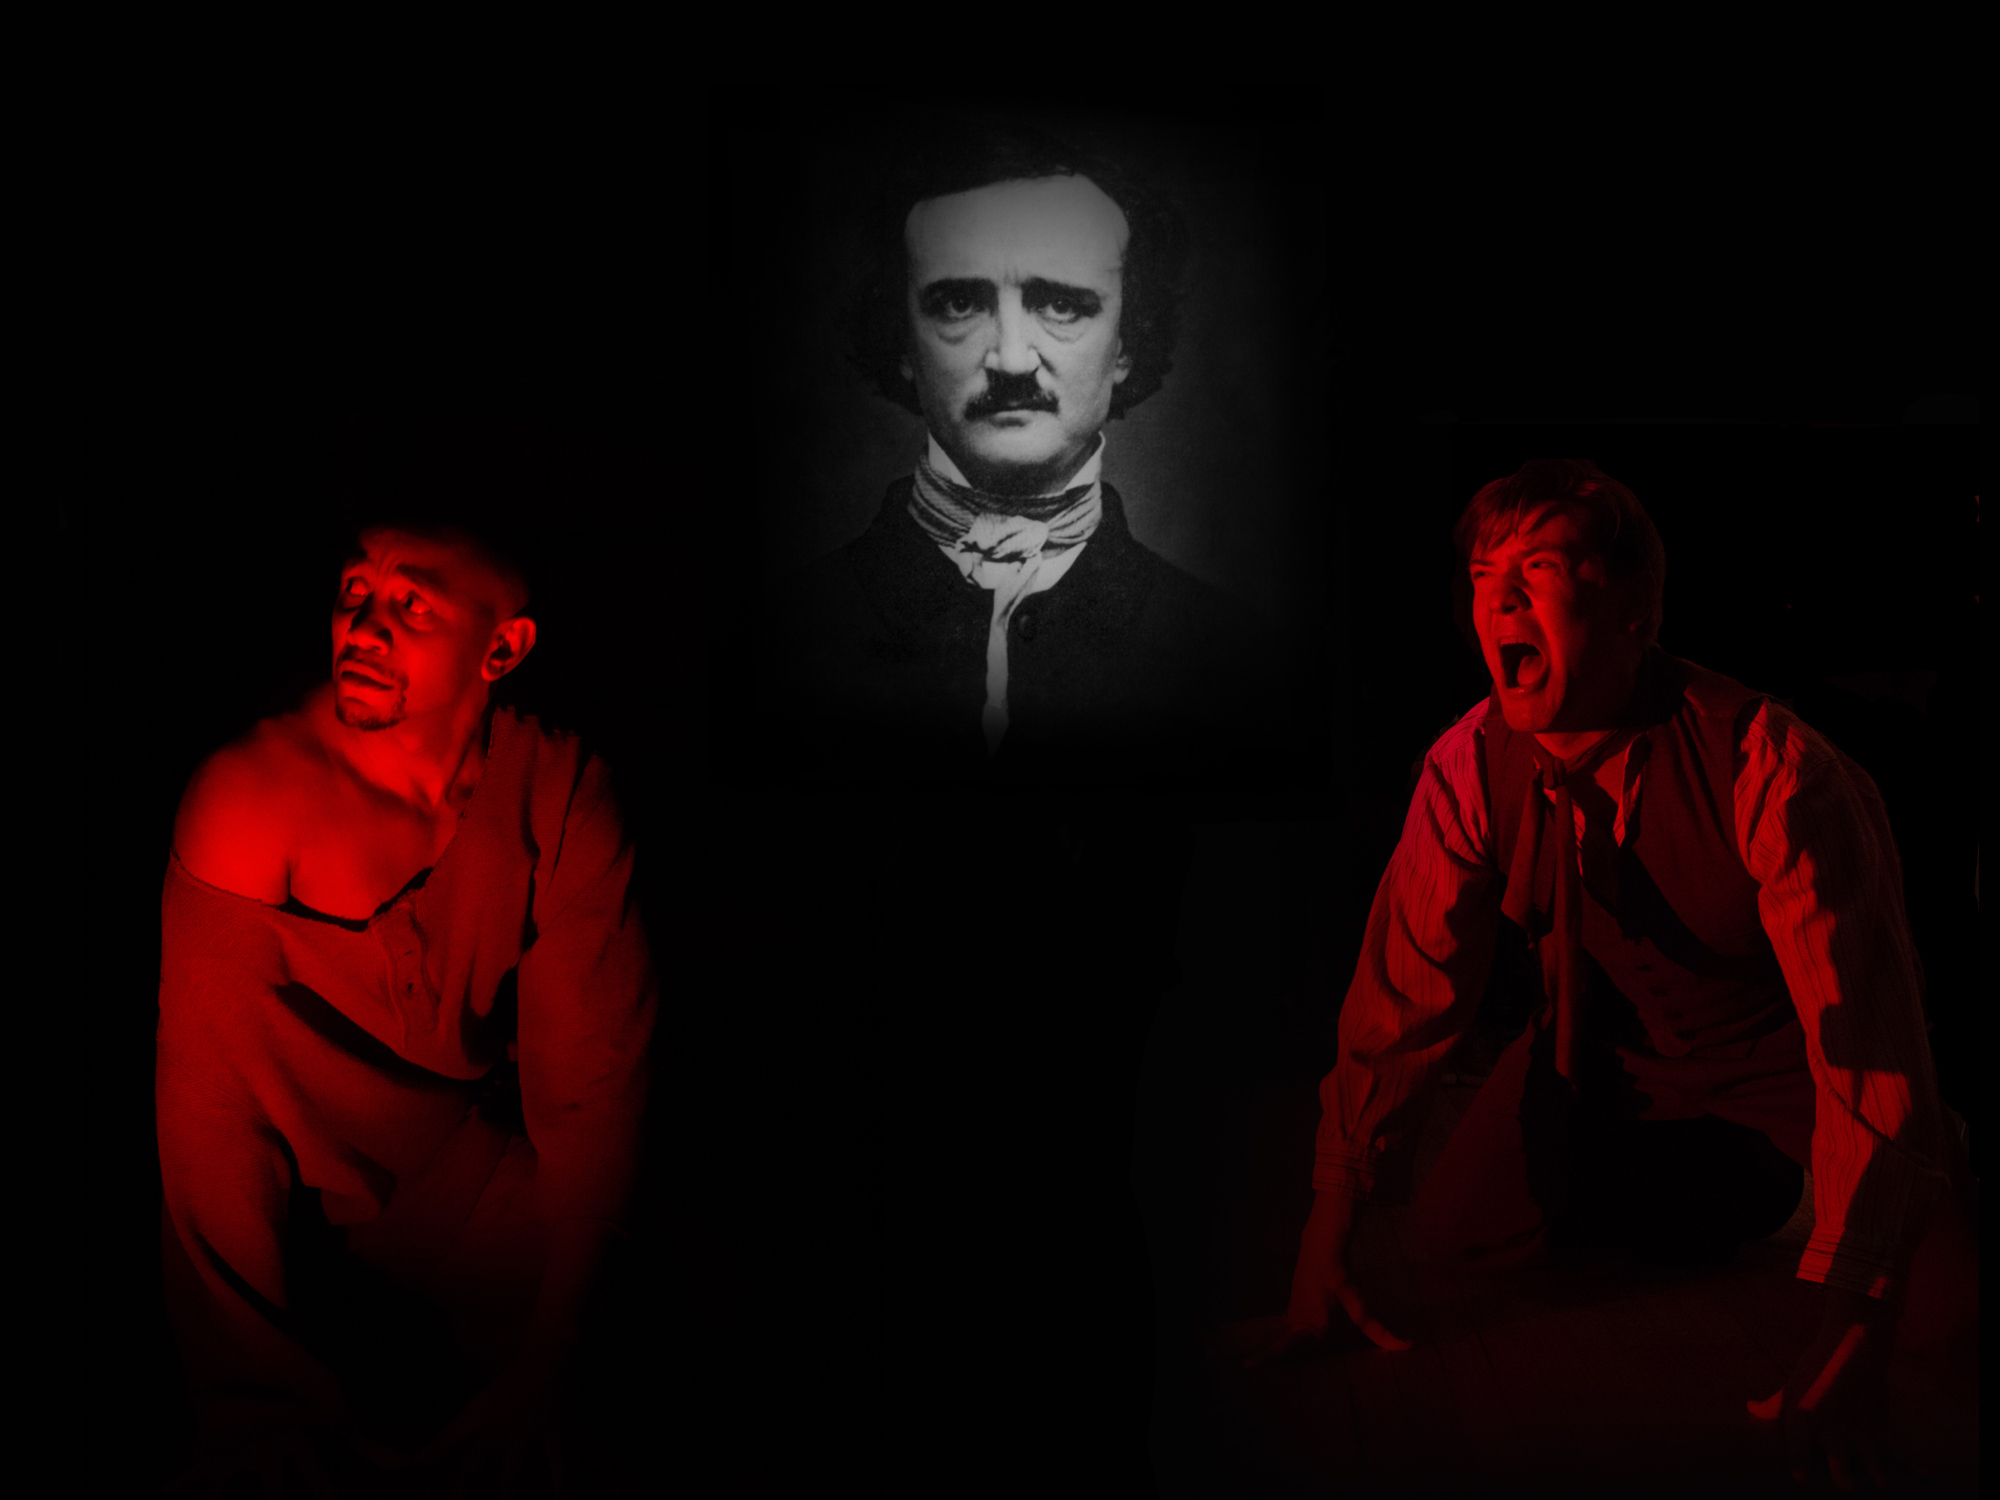 The face of Edgar Allan Poe looms over two men lit by red lighting, the Prisoner on the left, and the Madman on the right.